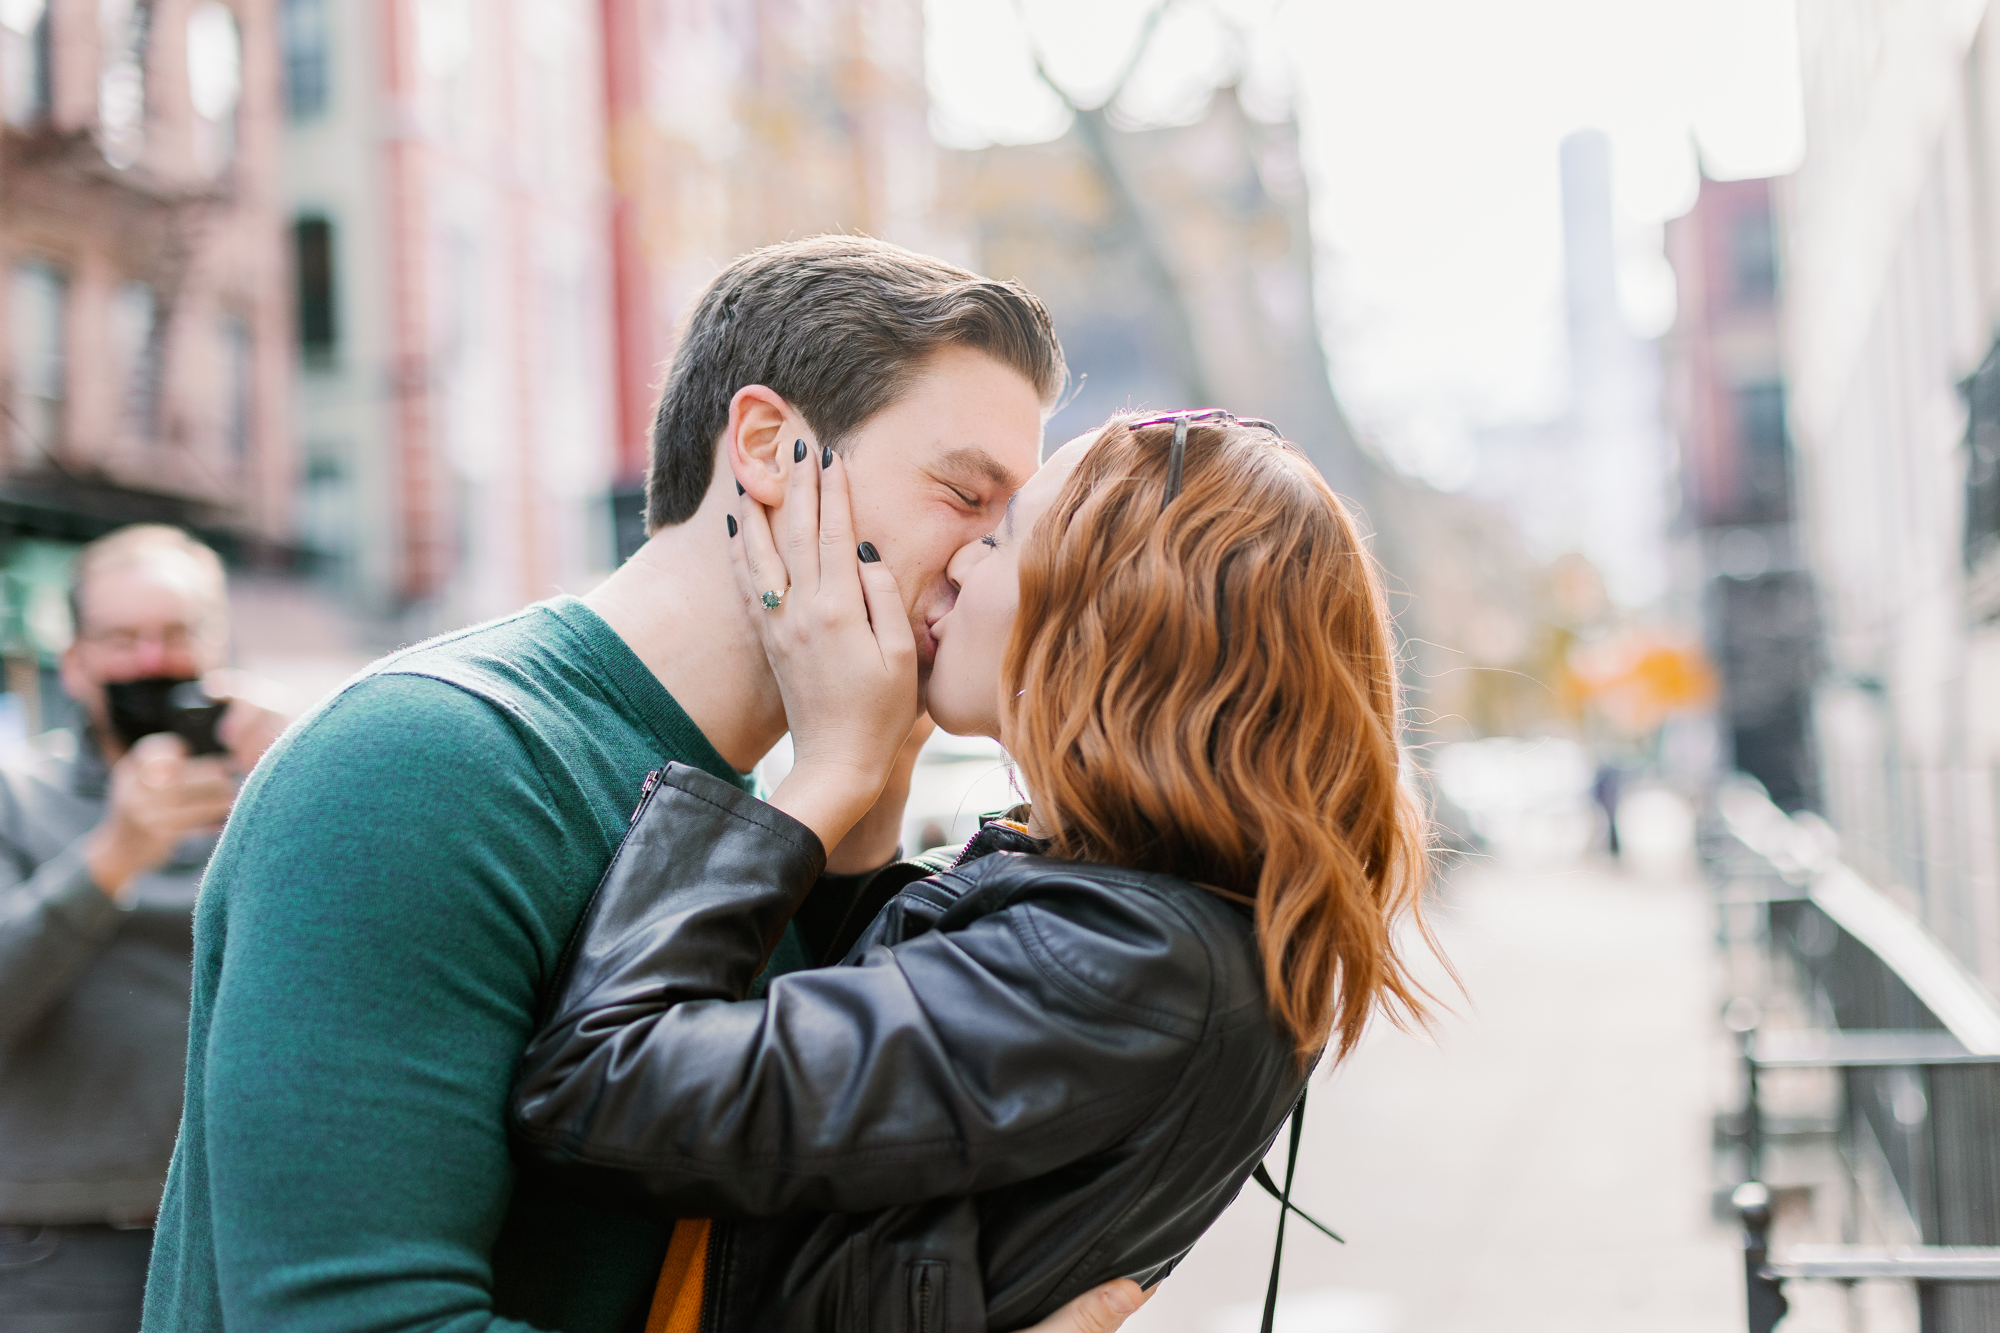 Bright Fall Proposal in Soho NYC